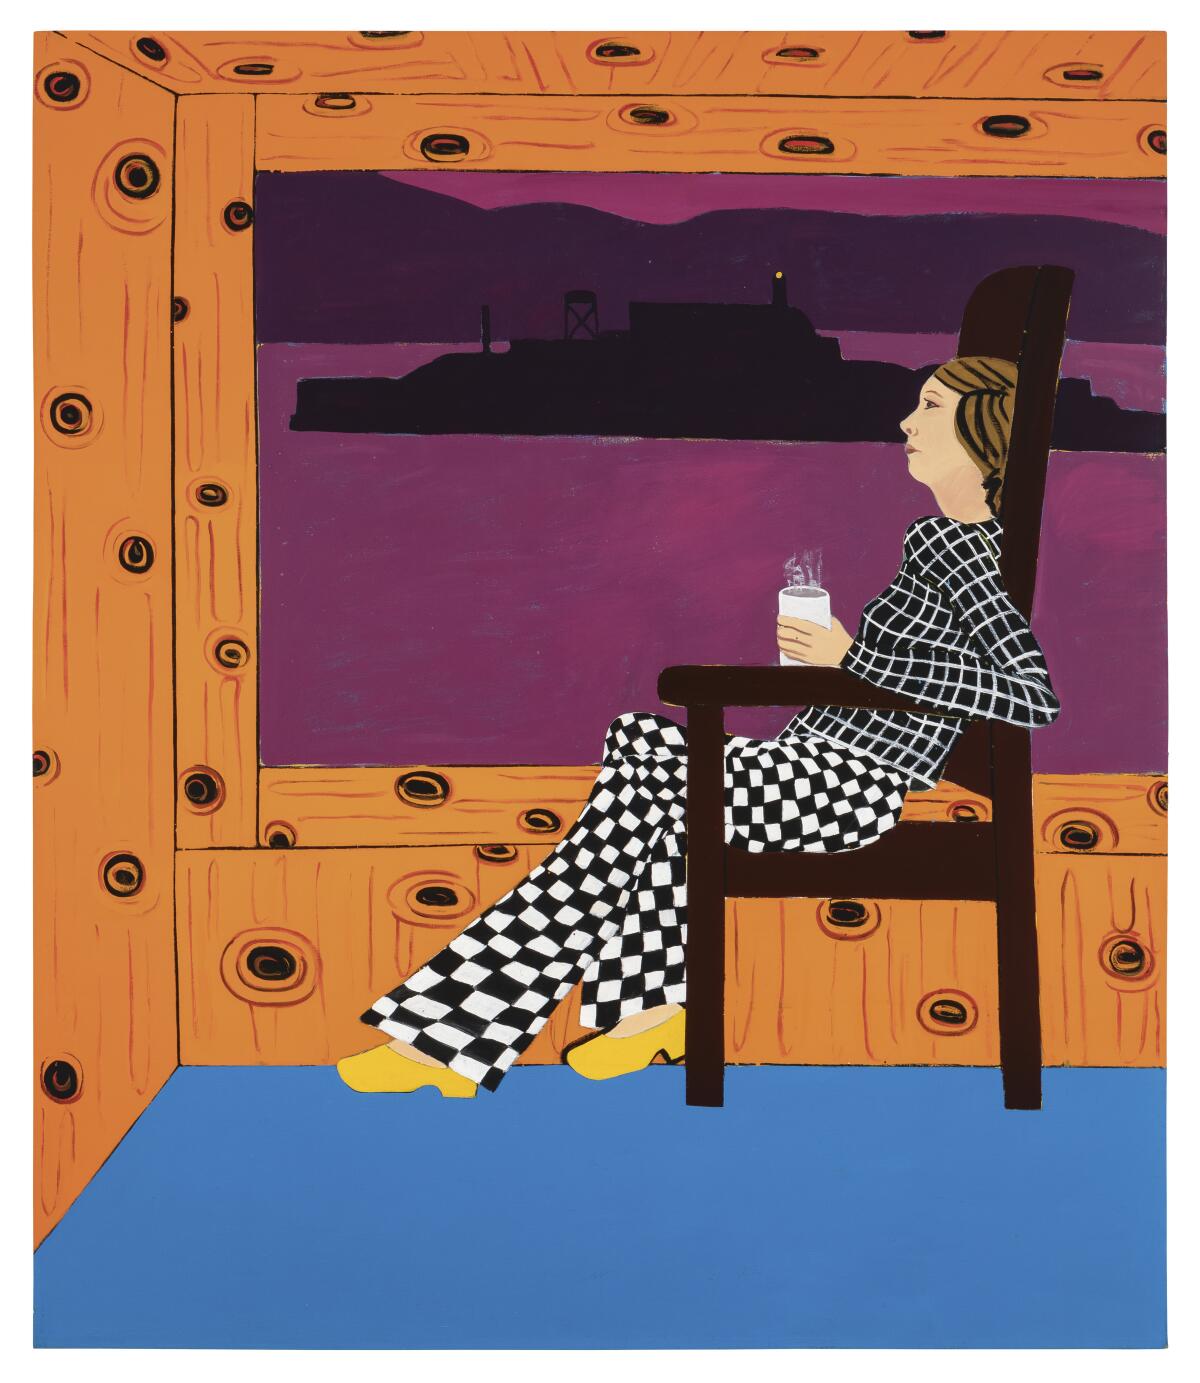 A painting shows a woman in checkered pants and shirt sitting before a bay whose waters are a deep purple